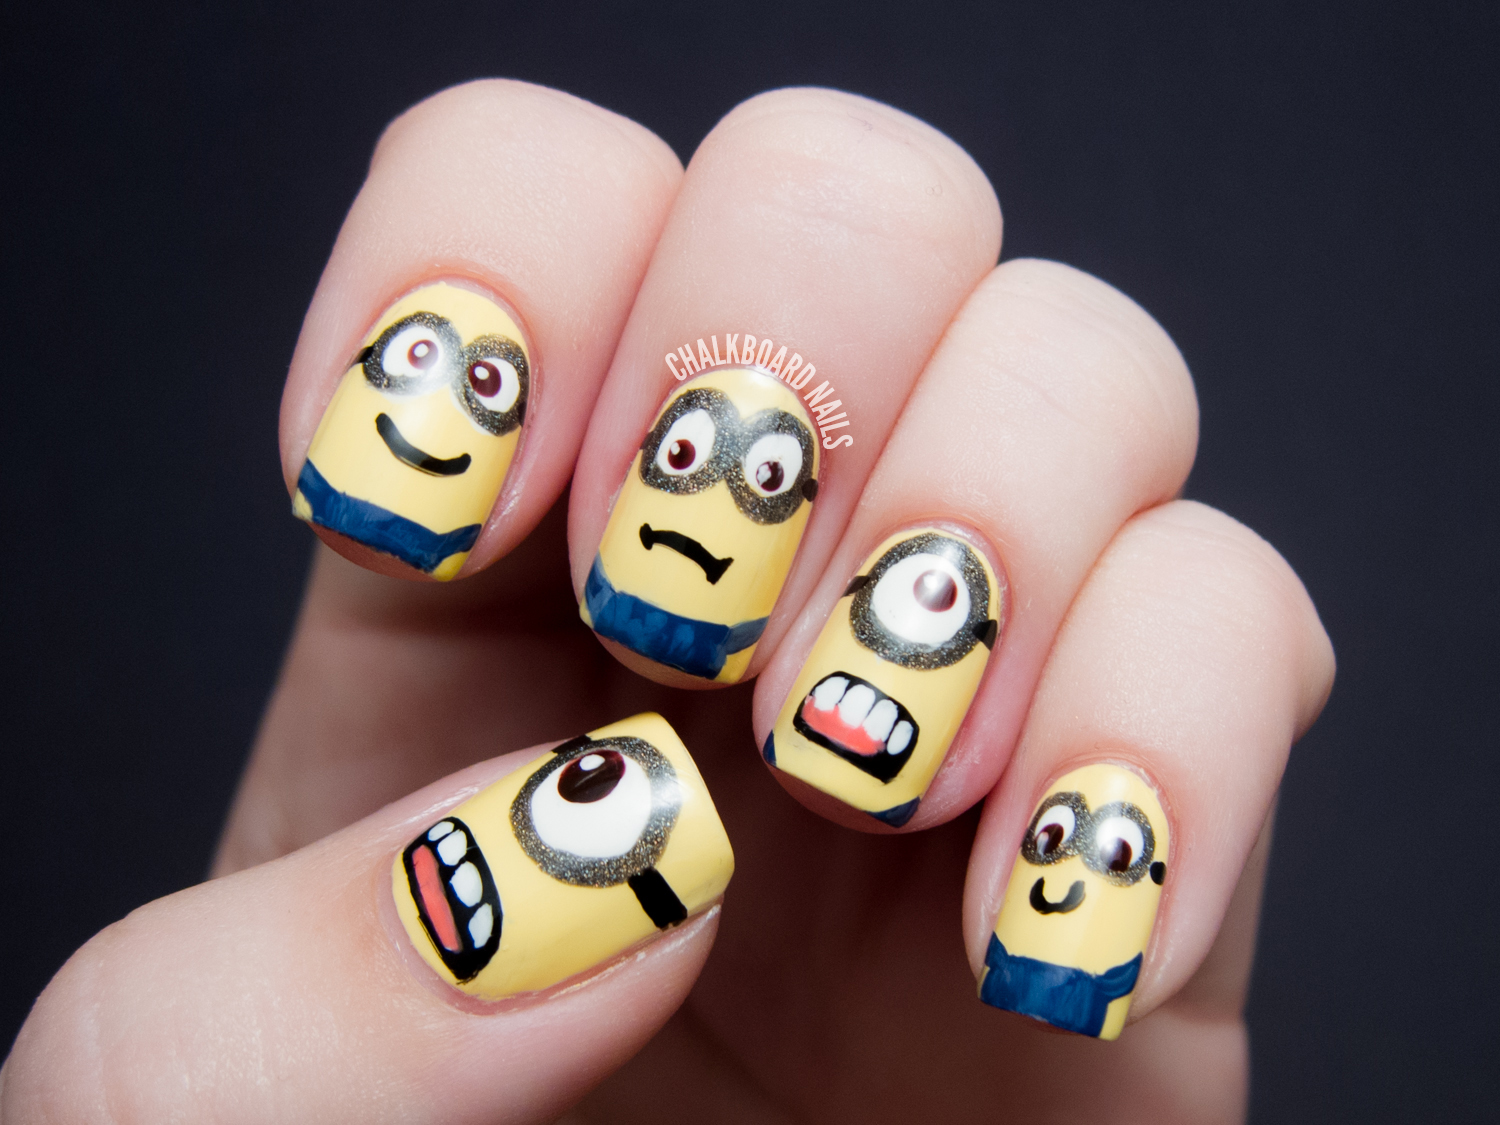 Beauty Tutorials - by DGB: How to: Minions Nail Art Tutorial